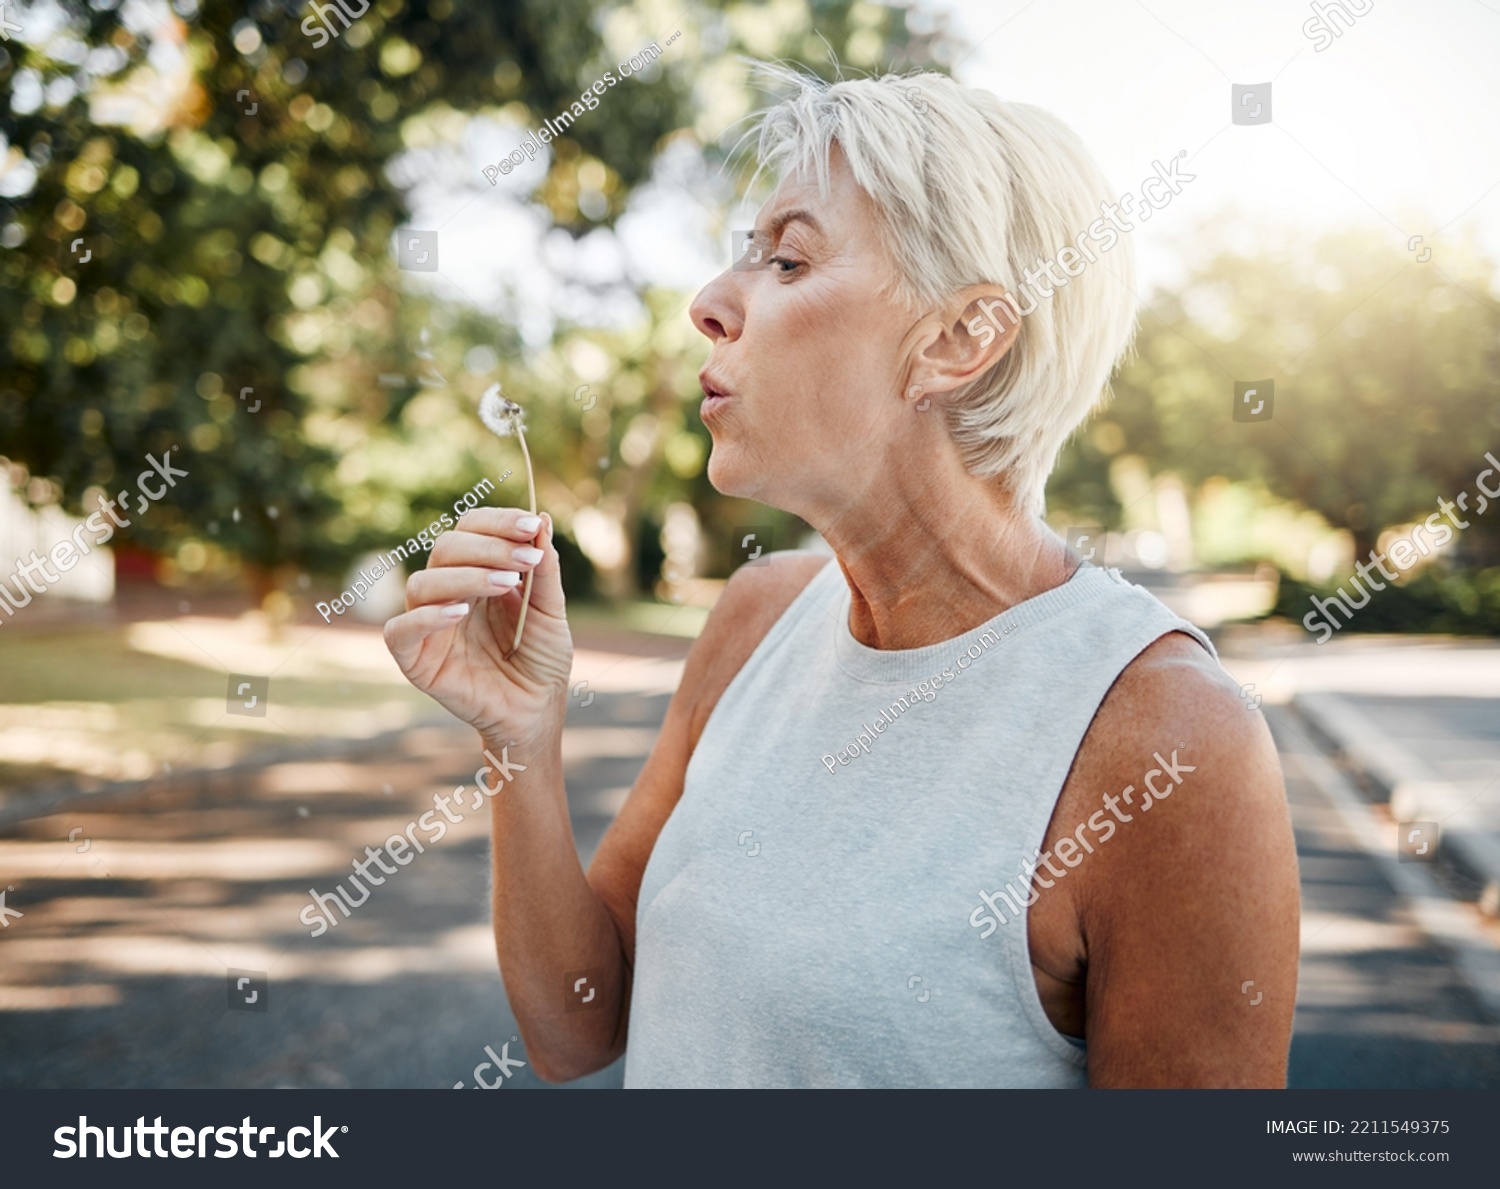 Senior woman blowing dandelion flower outdoors for freedom, hope and spring allergies environment. Elderly retirement lady holding plant for wellness, healthy lifestyle and pollen allergy in nature #2211549375